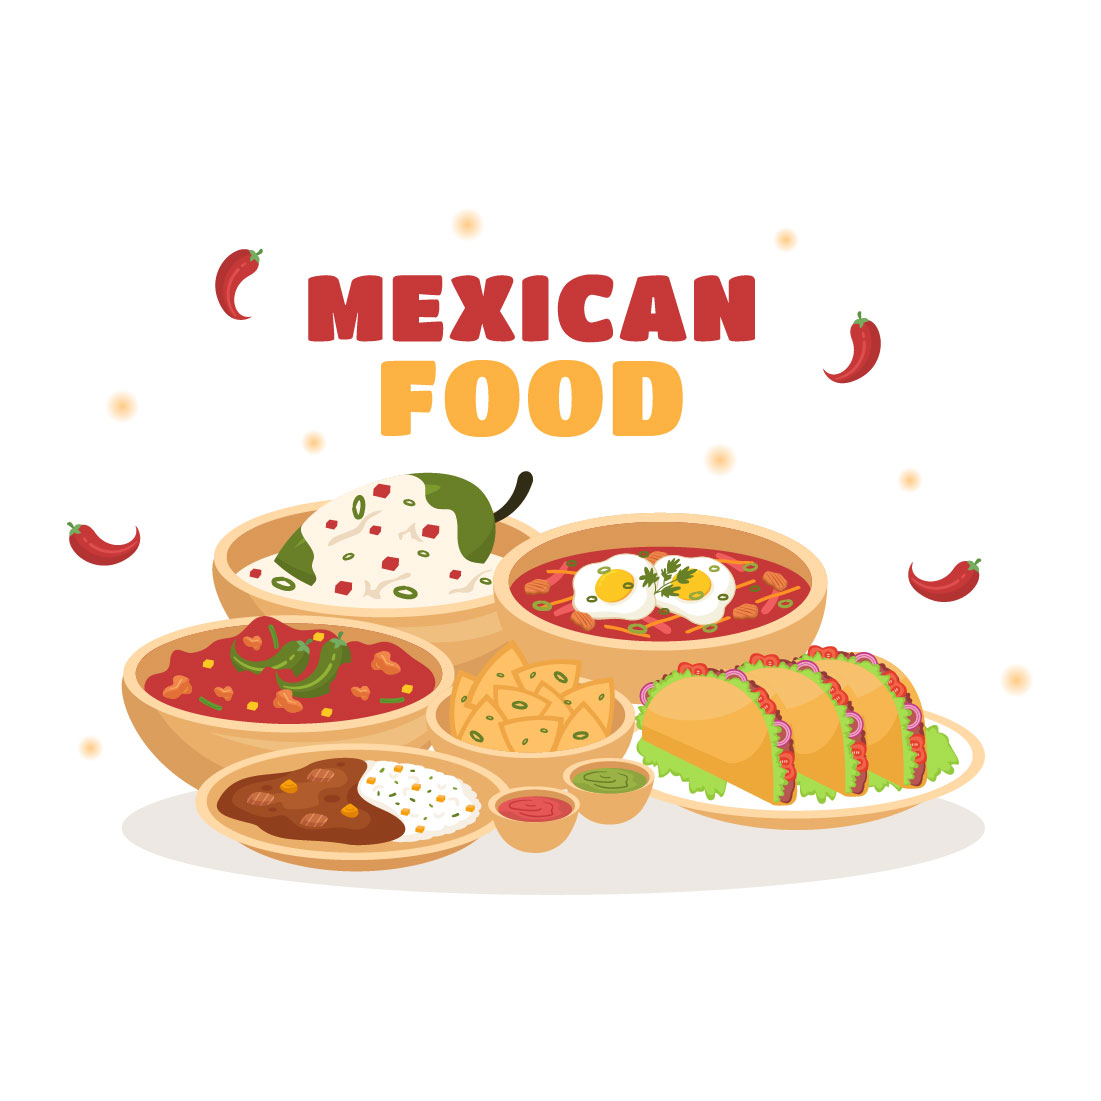 Adorable cartoon image with mexican food.